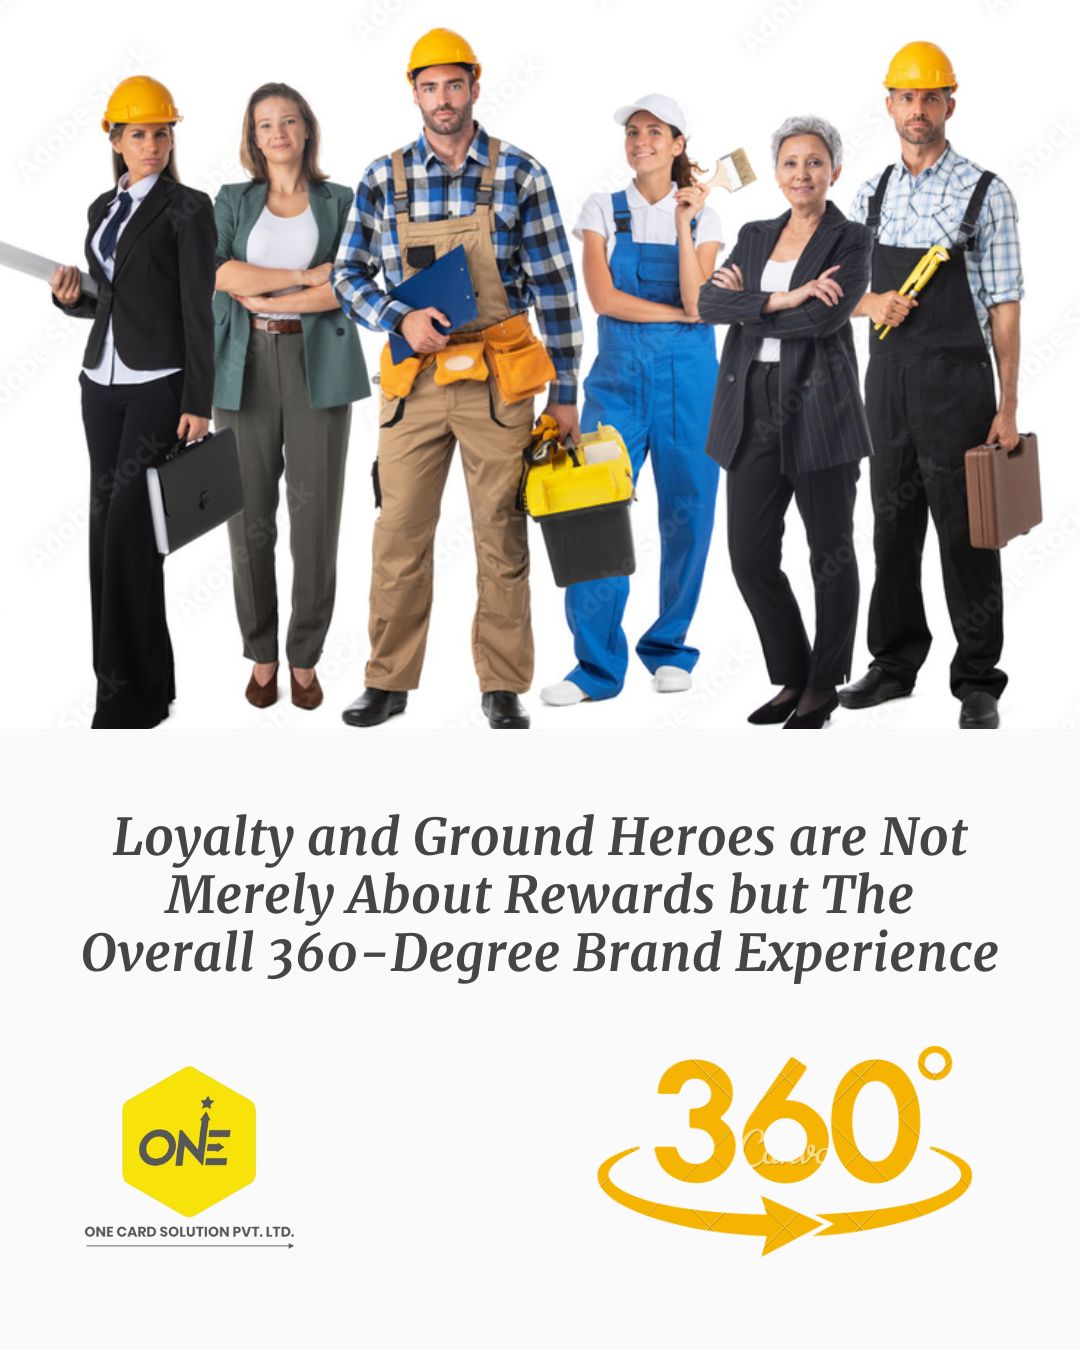 Loyalty Is Not Merely About Rewards But The Overall 360-Degree Brand Experience